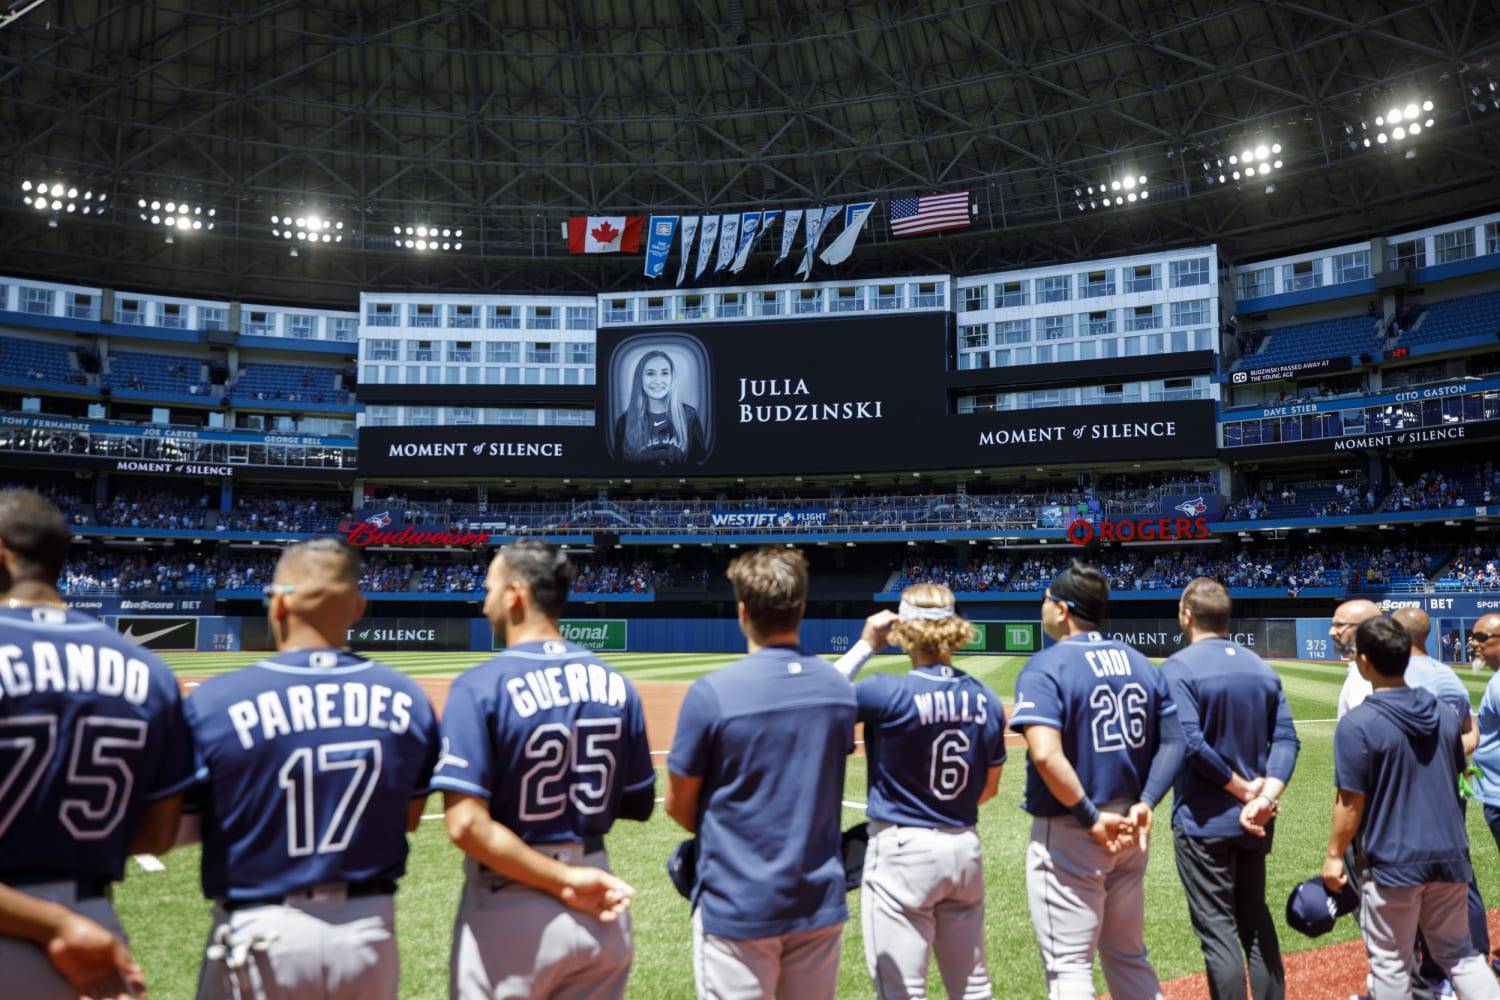 Teenage daughter of Toronto Blue Jays’ first base coach dead in presumed boating accident